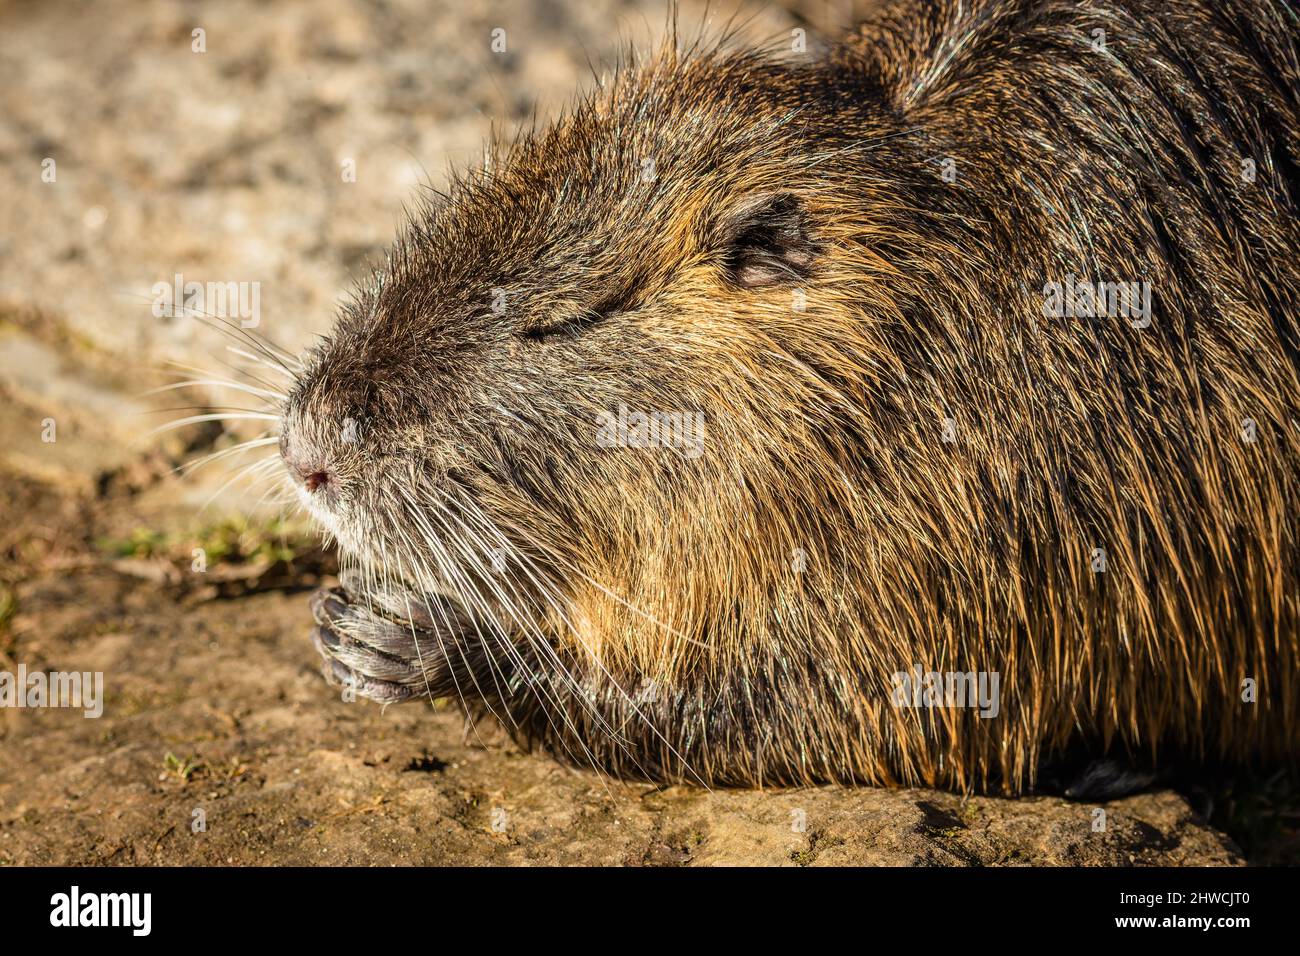 Close up image of a brown coypu on muddy ground with its eyes closed and paws put together holding food looking funny as if praying. Sunny day. Stock Photo